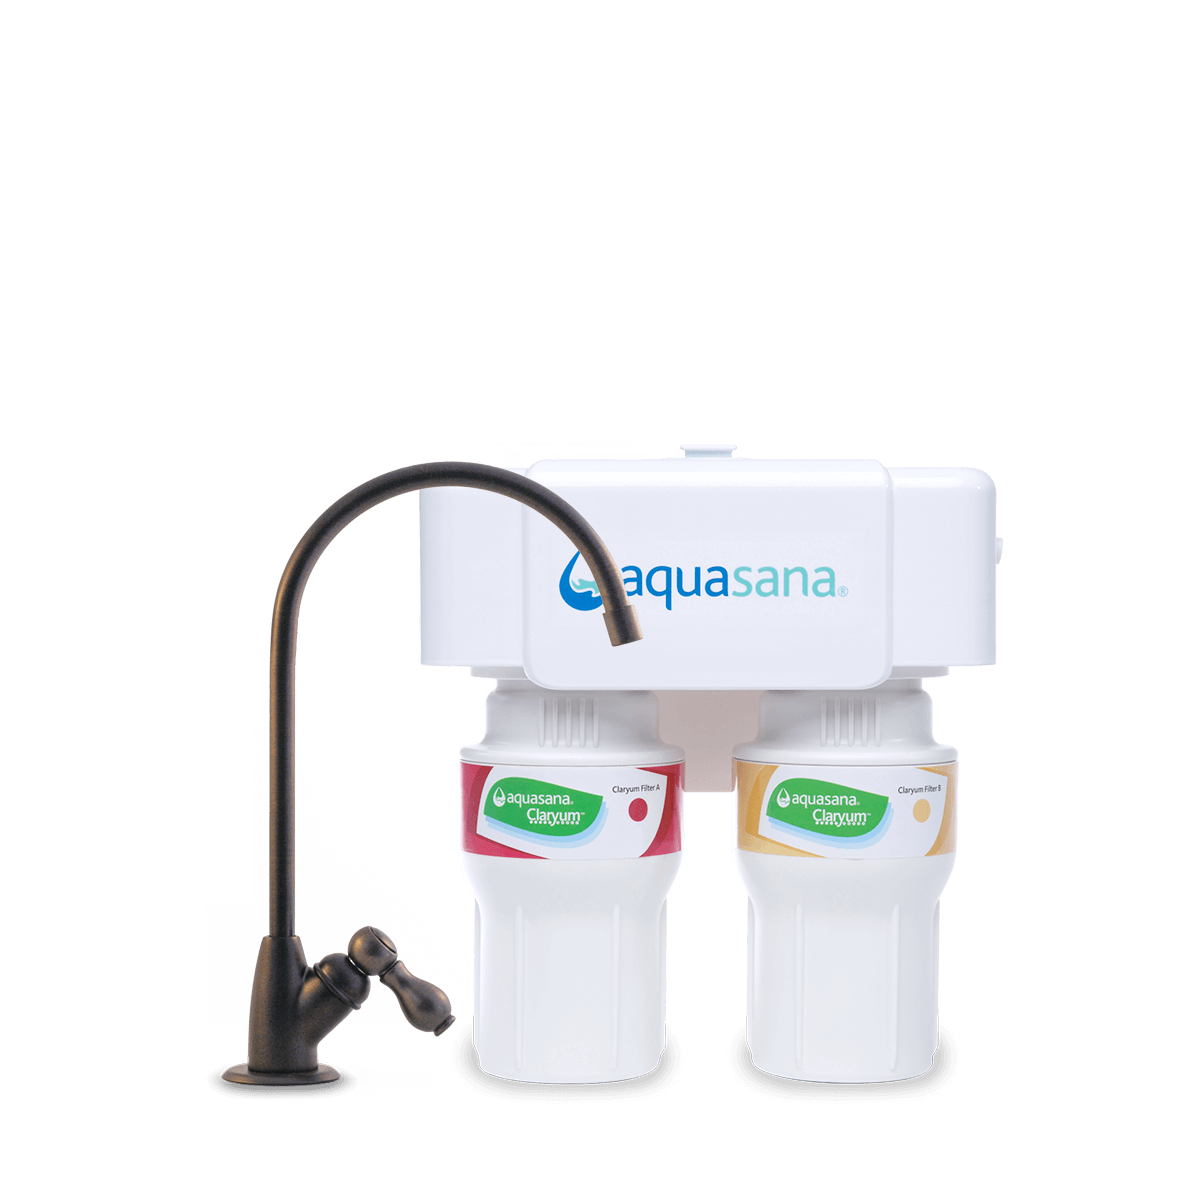 2-Stage Under Sink Water Filter, Oil Rubbed Bronze, 1/2 Year/500 Gallon Aquasana